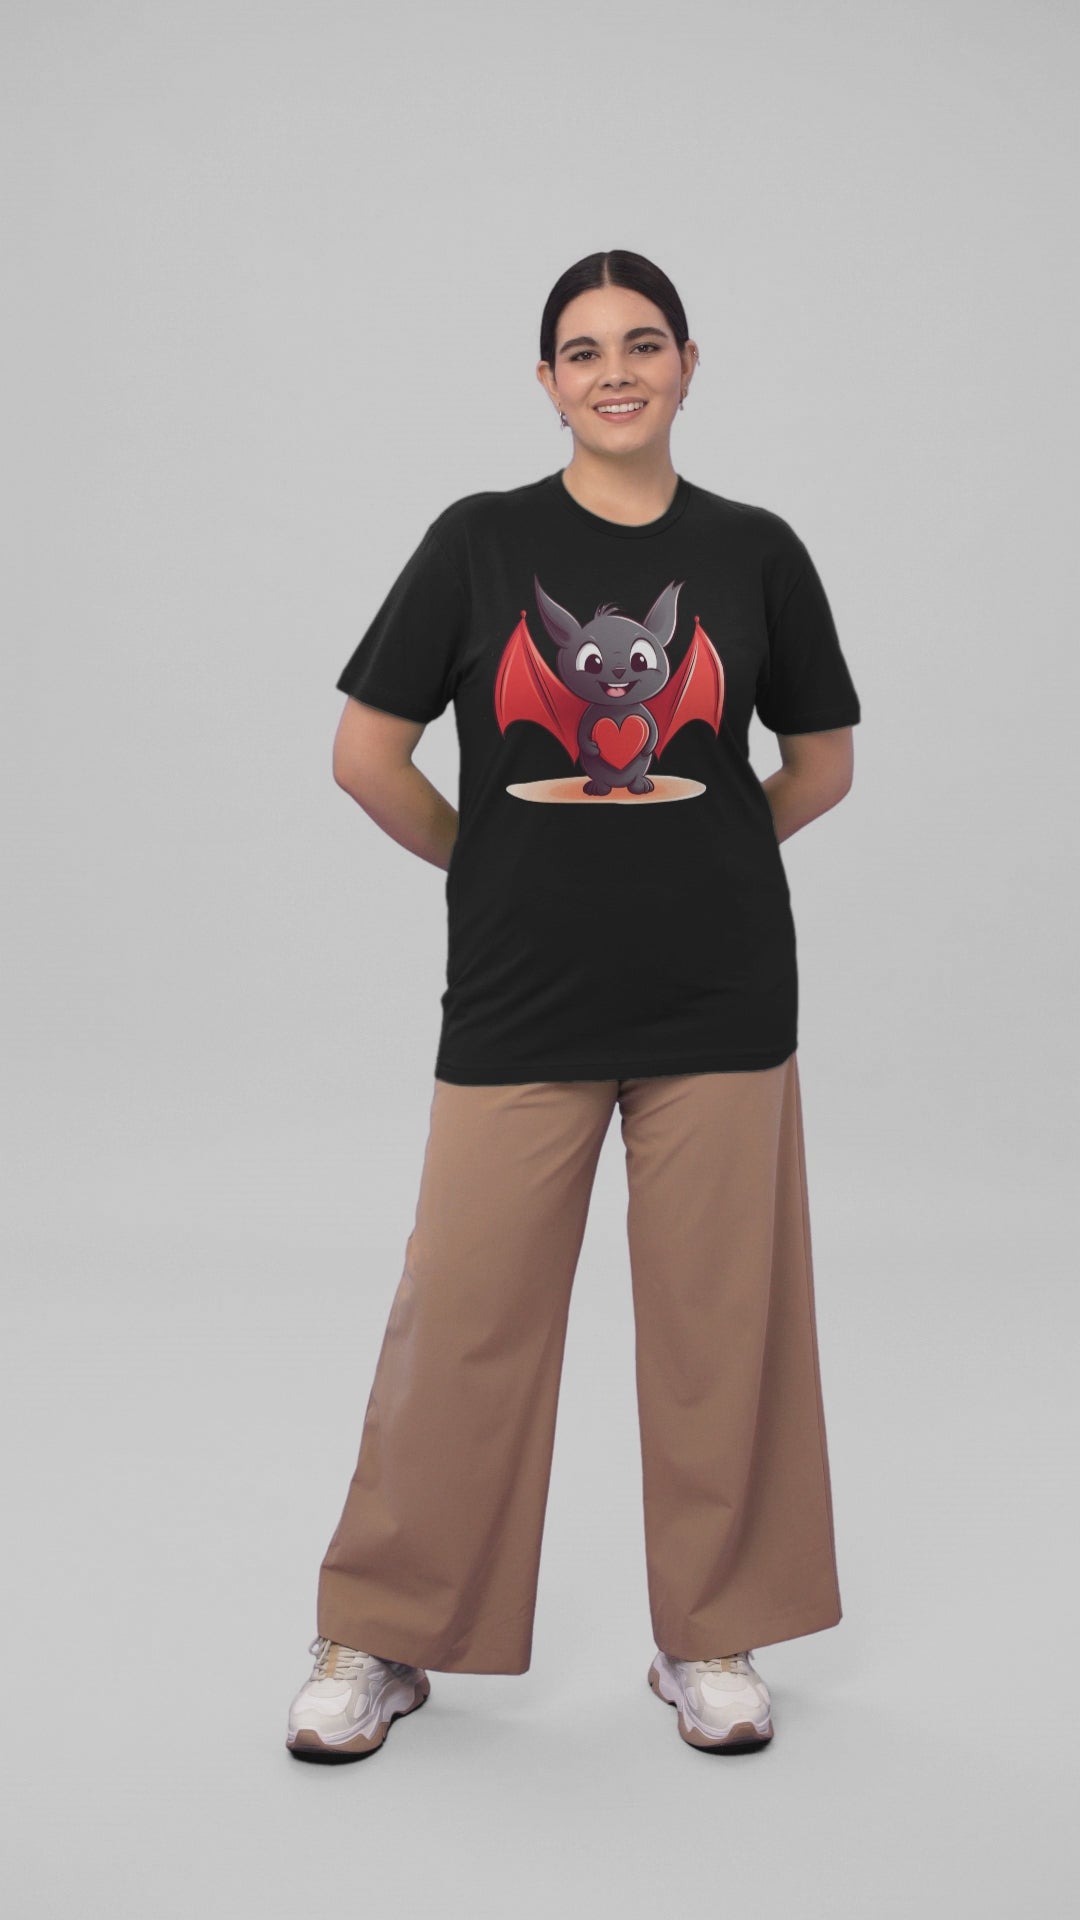 A smiling woman in a studio psing with a black t-shirt adorned with a cute cartoon bat character in the center holding a red heart, showcasing a playful and loving design.